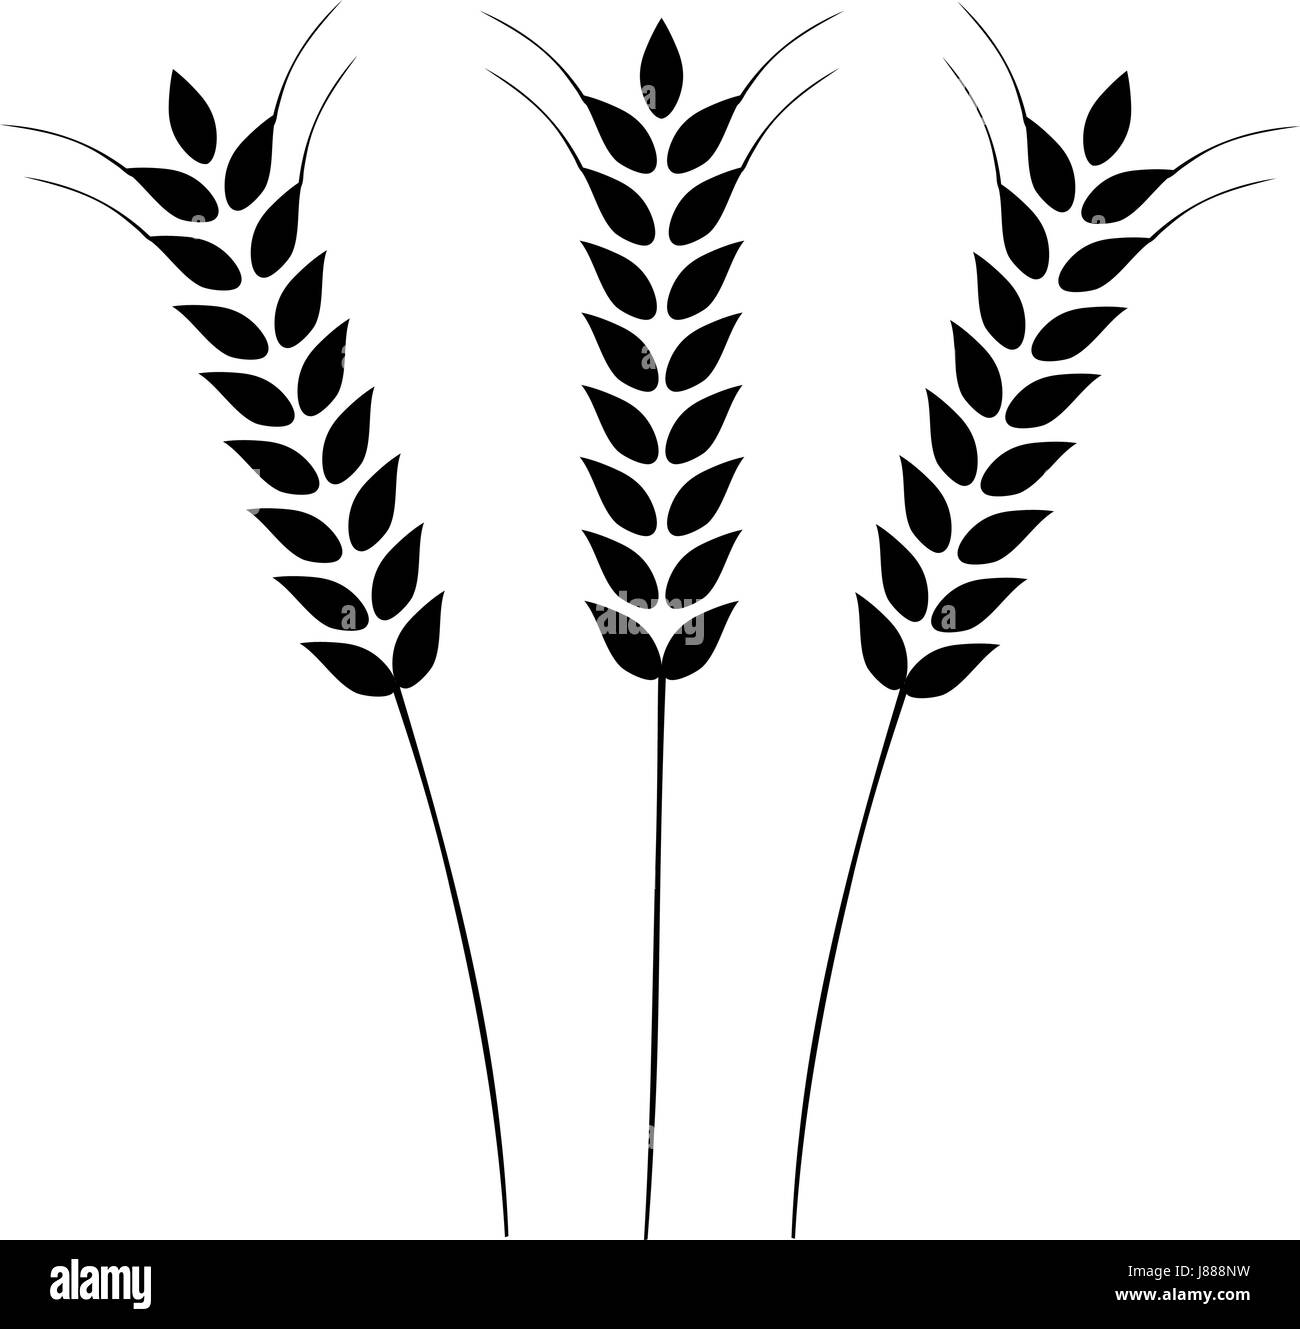 Vector illustration of Ears of Wheat, Barley or Rye. Ideal for bread packaging. Vector icon. Stock Vector